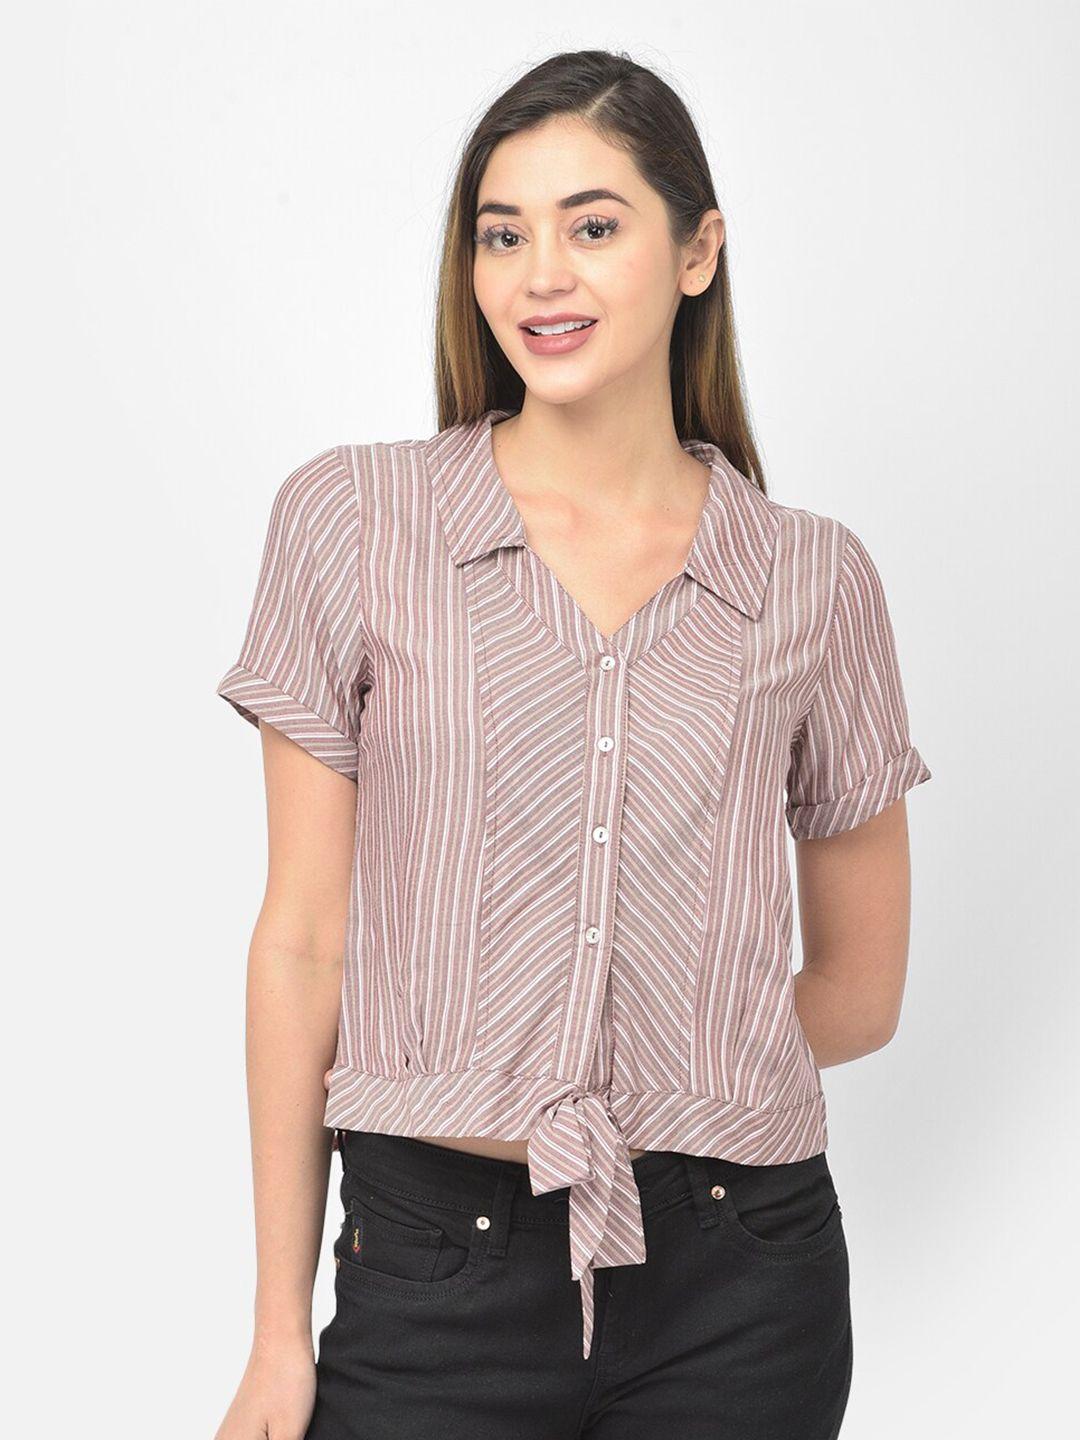 latin-quarters-brown-striped-shirt-style-top